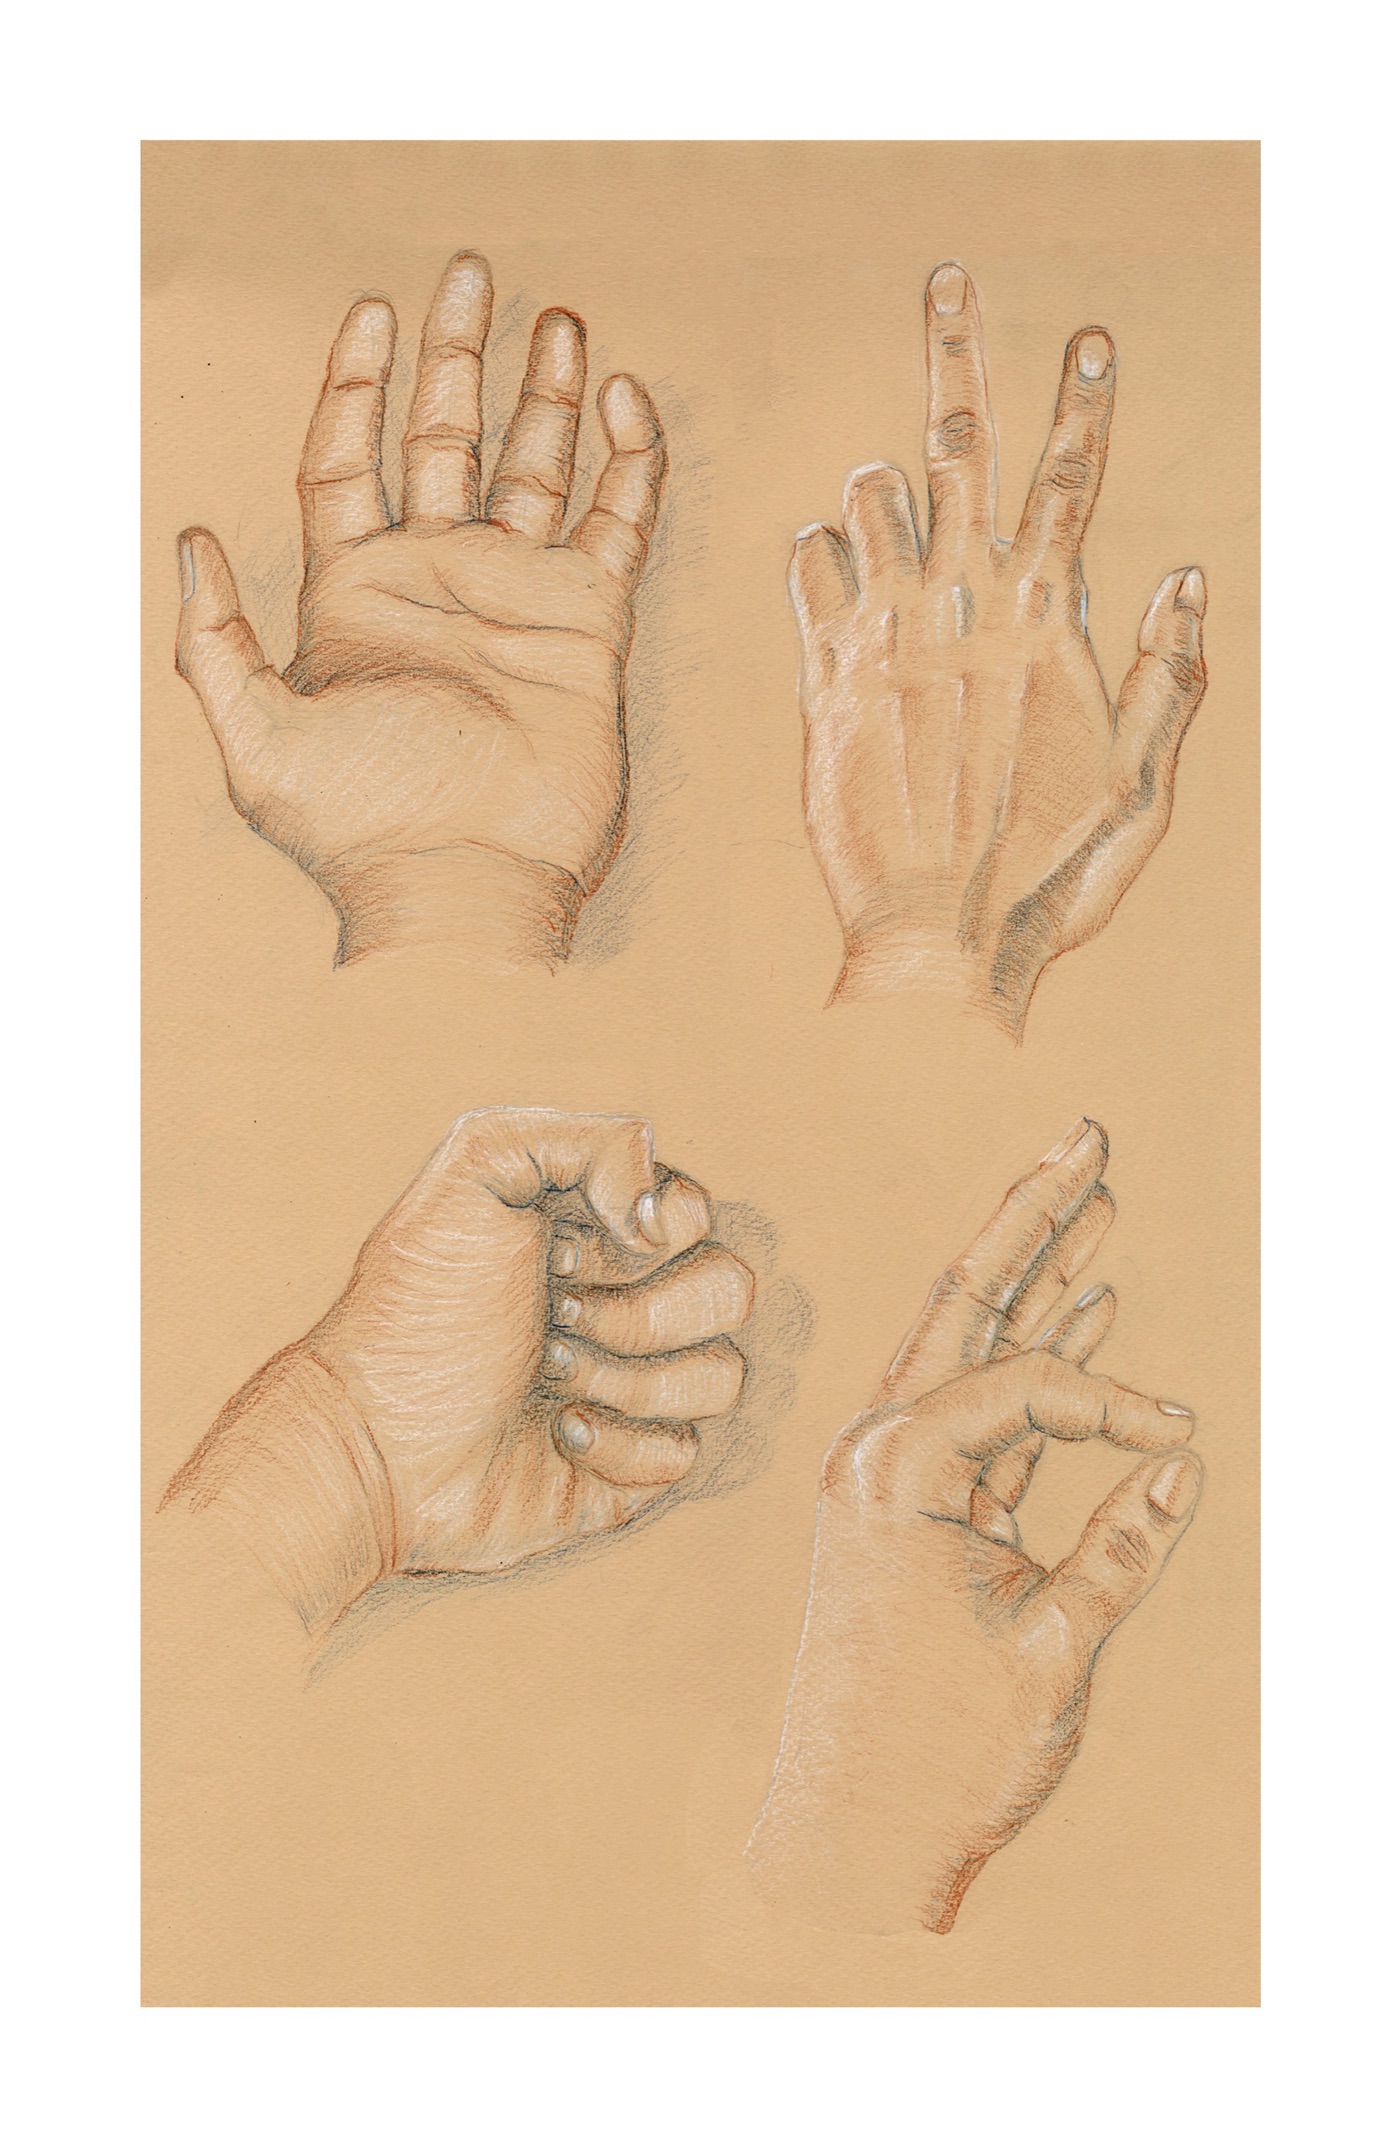 draw conte newspprint muscle study fine arts skeleton hands feet colour pencil obervational Referenced